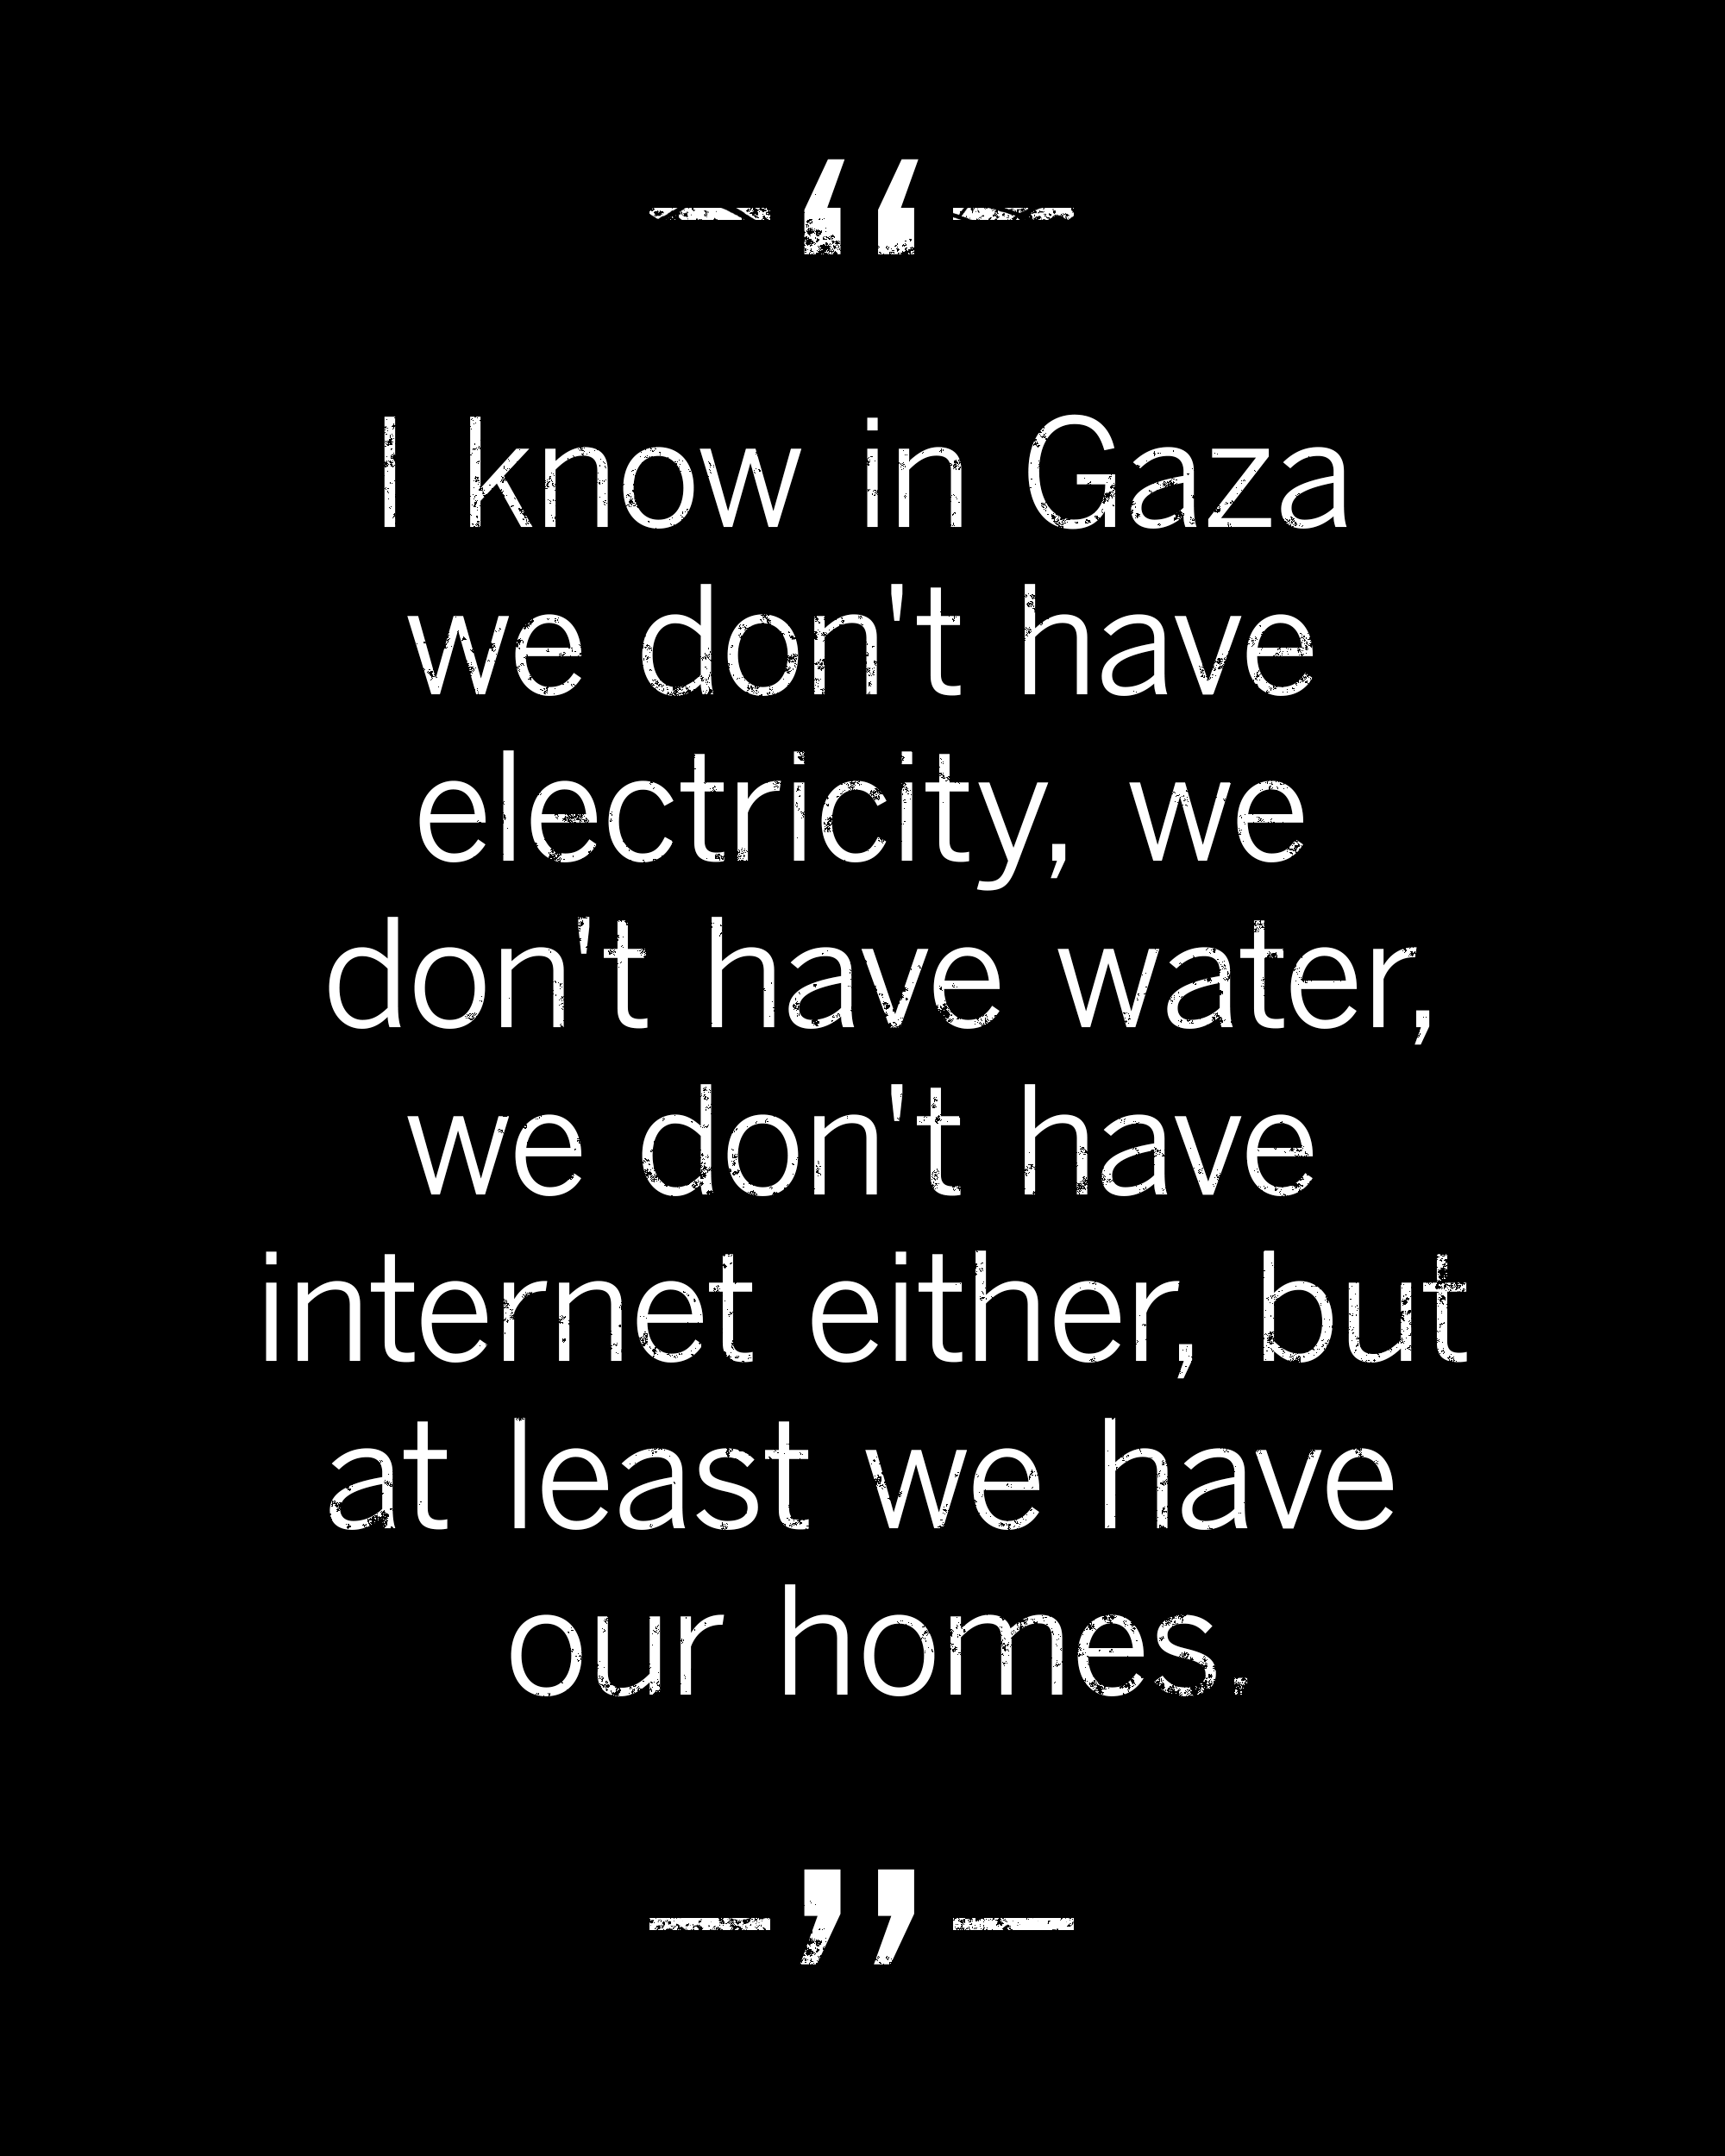 I know in Gaza we don't have electricity, water, or internet, but at least we have our homes.